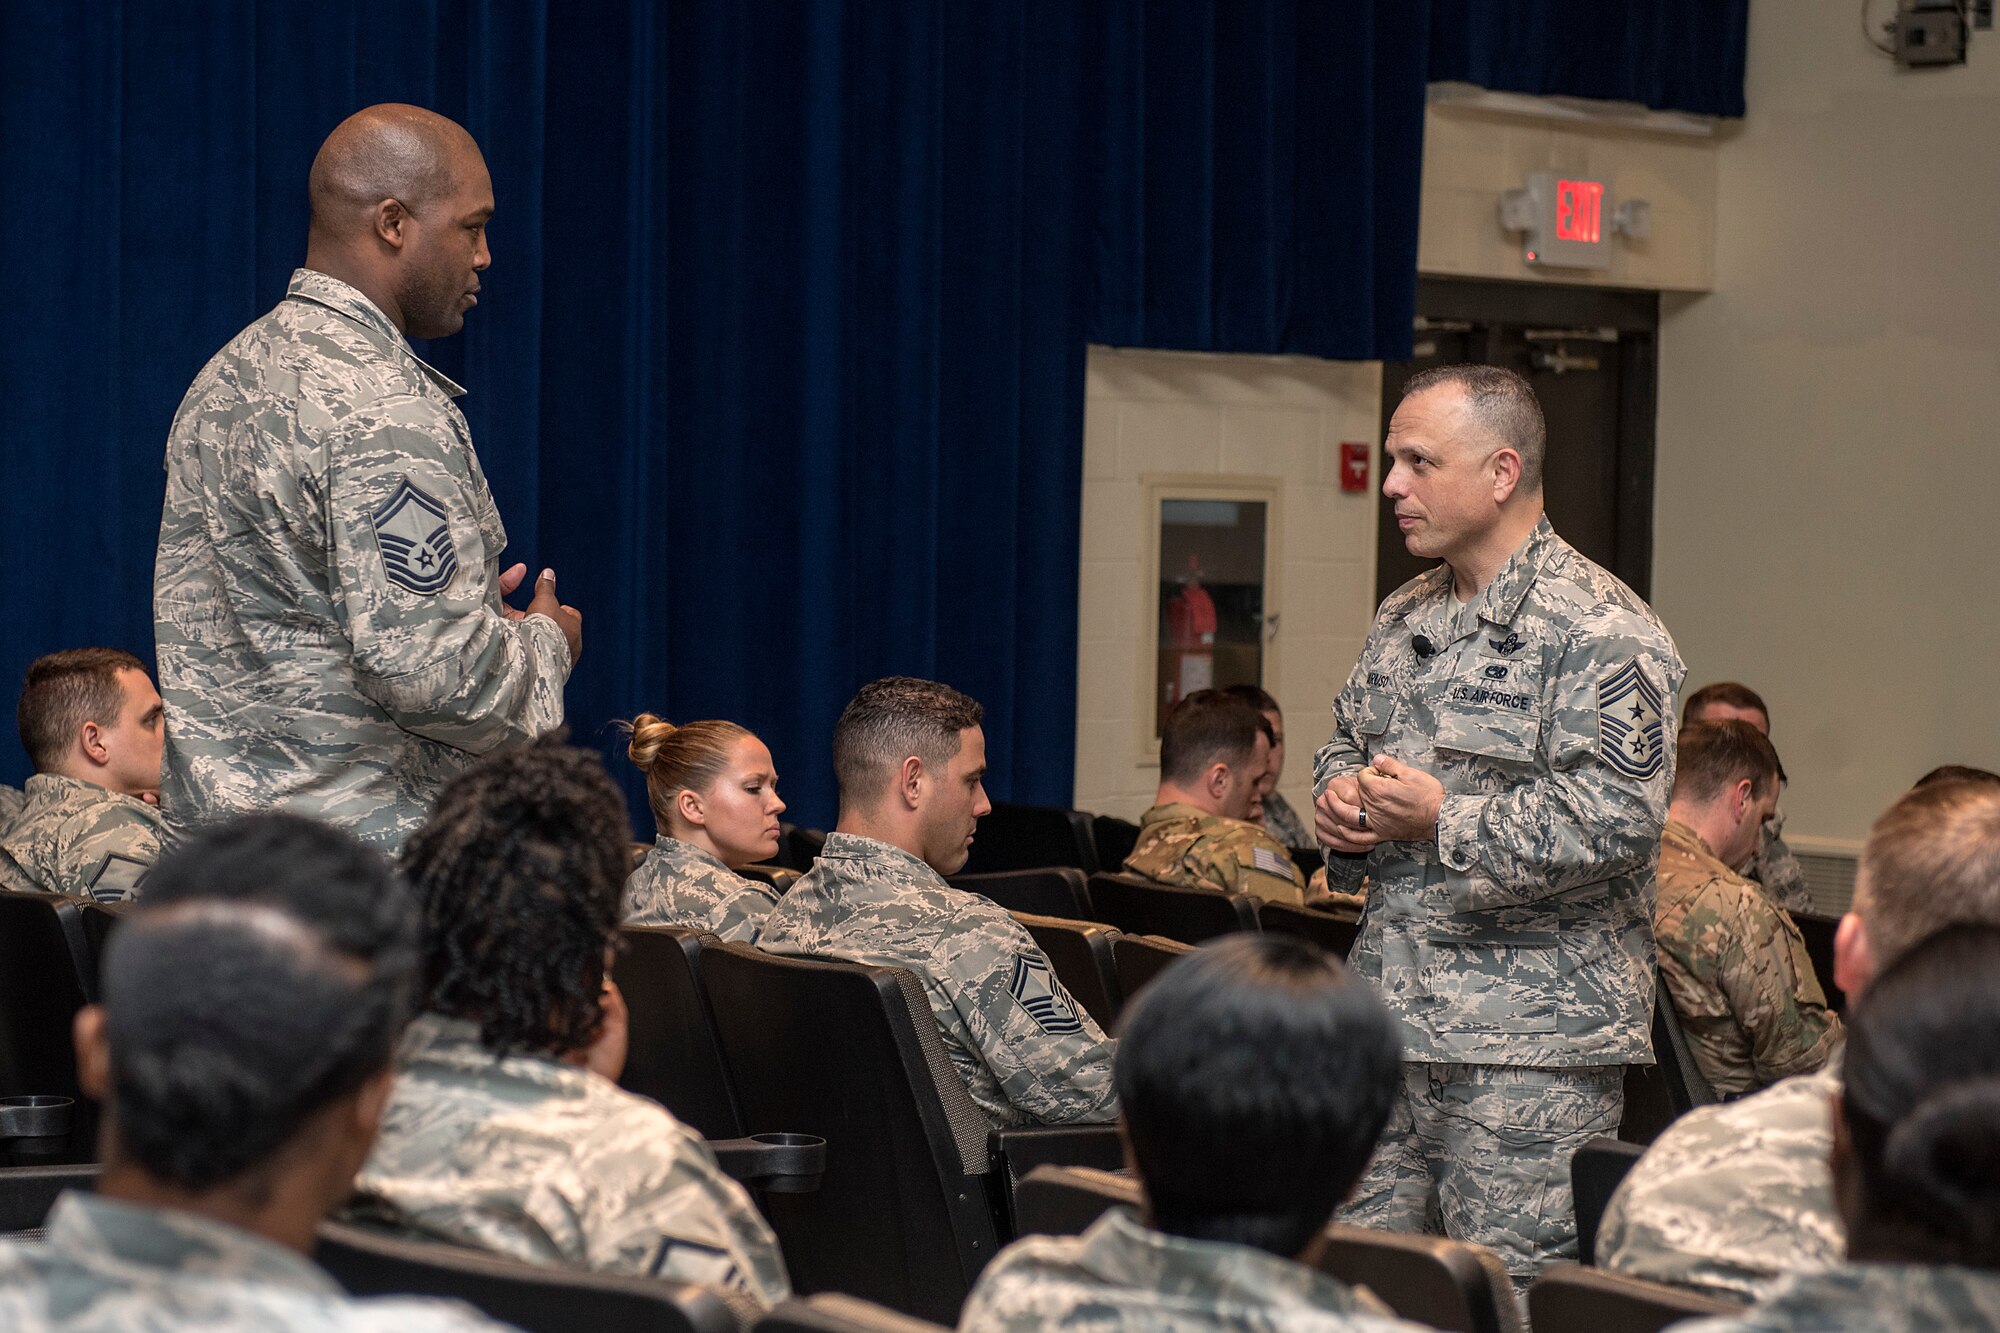 Senior Master Sgt. Marquis Daniels, 4th Security Forces Squadron, asks a question to Chief Master Sgt. Matthew Caruso, command senior enlisted leader of U.S. Transportation Command, during a senior NCO all call at the theater Feb. 15, 2018, at Seymour Johnson Air Force Base, North Carolina.